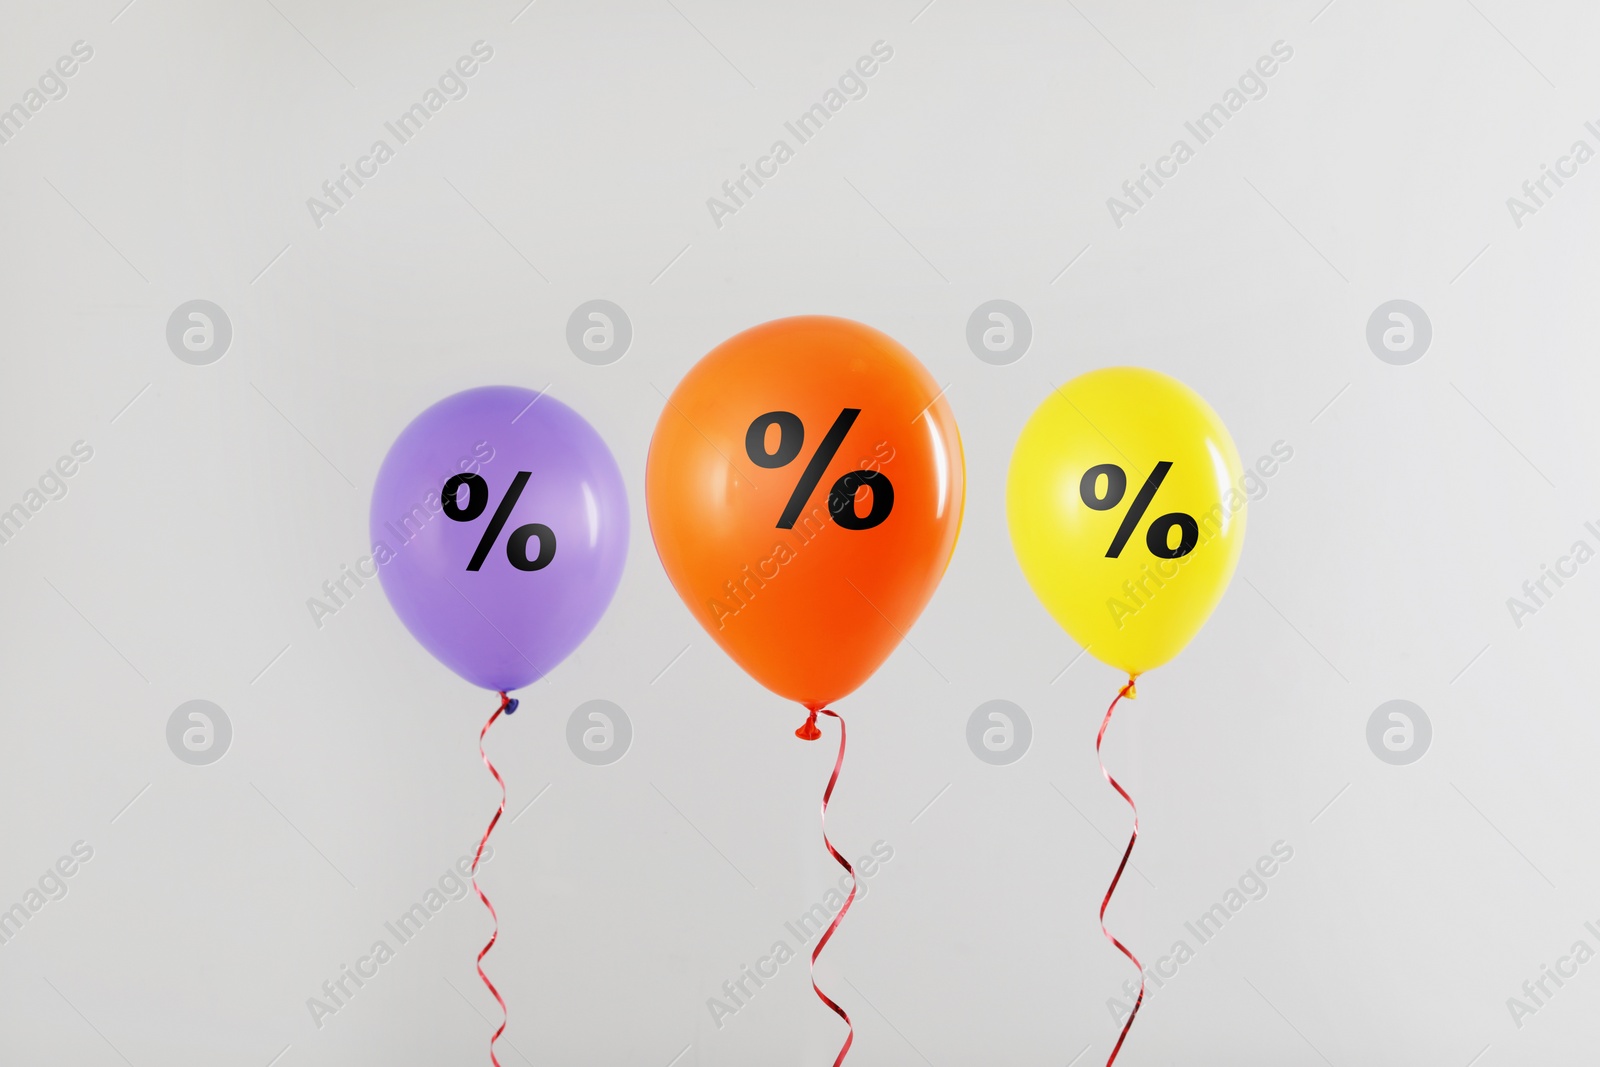 Image of Discount offer. Balloons with percent sign on white background